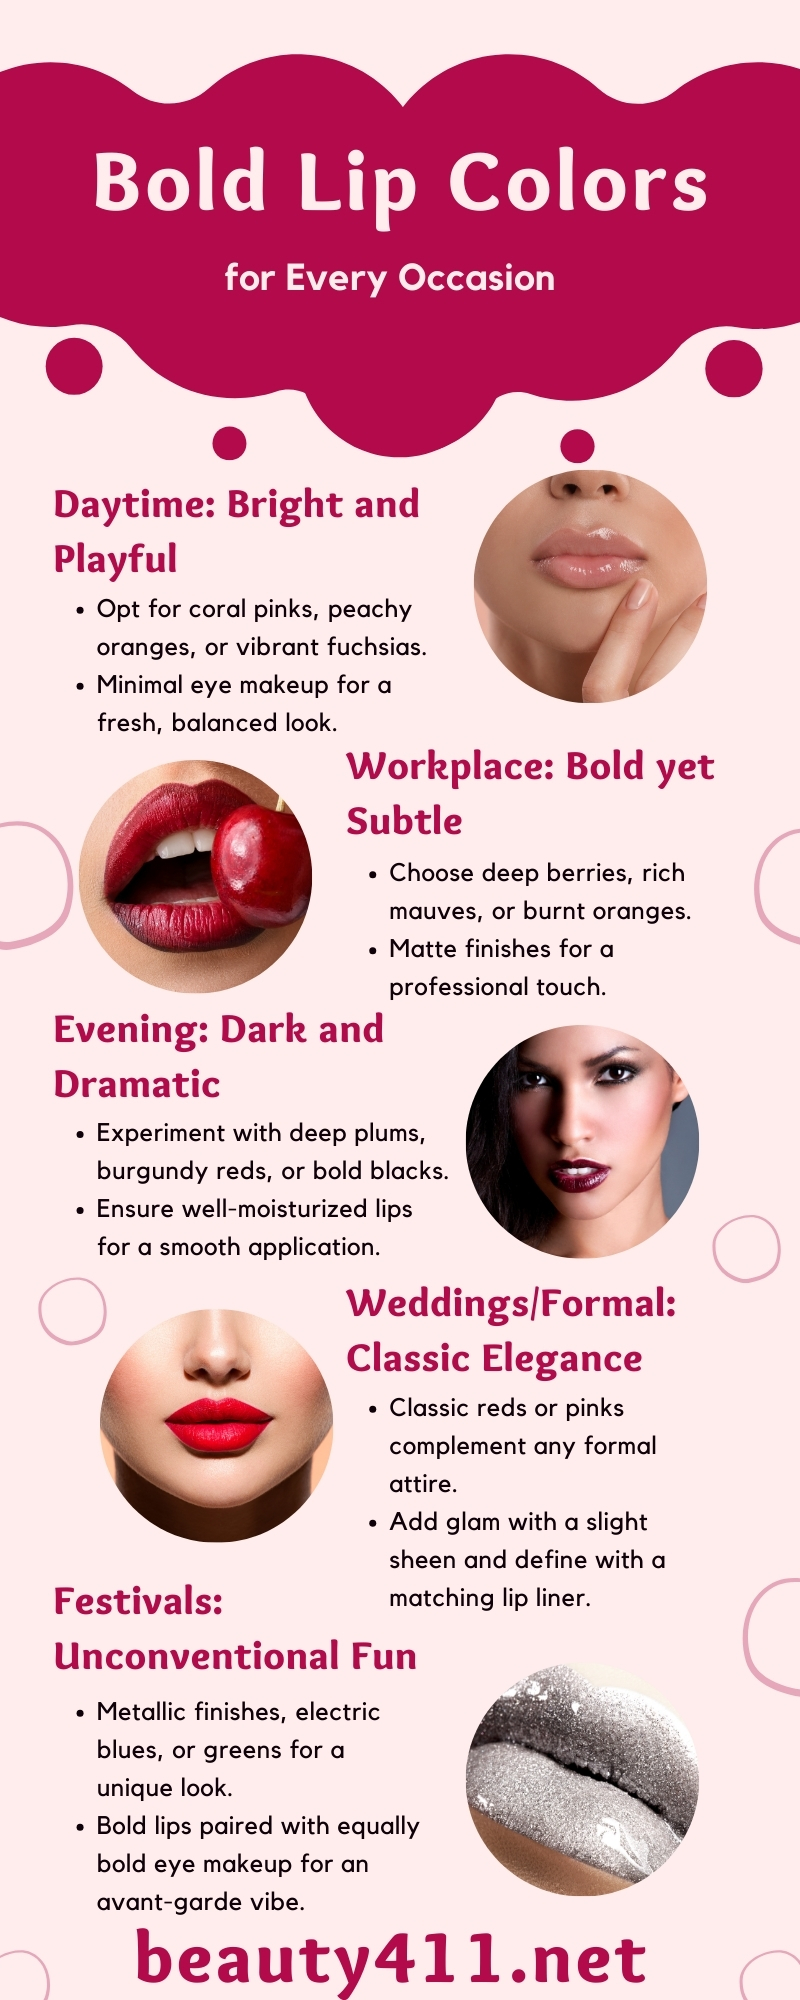 Bold Lip Colors Infographic